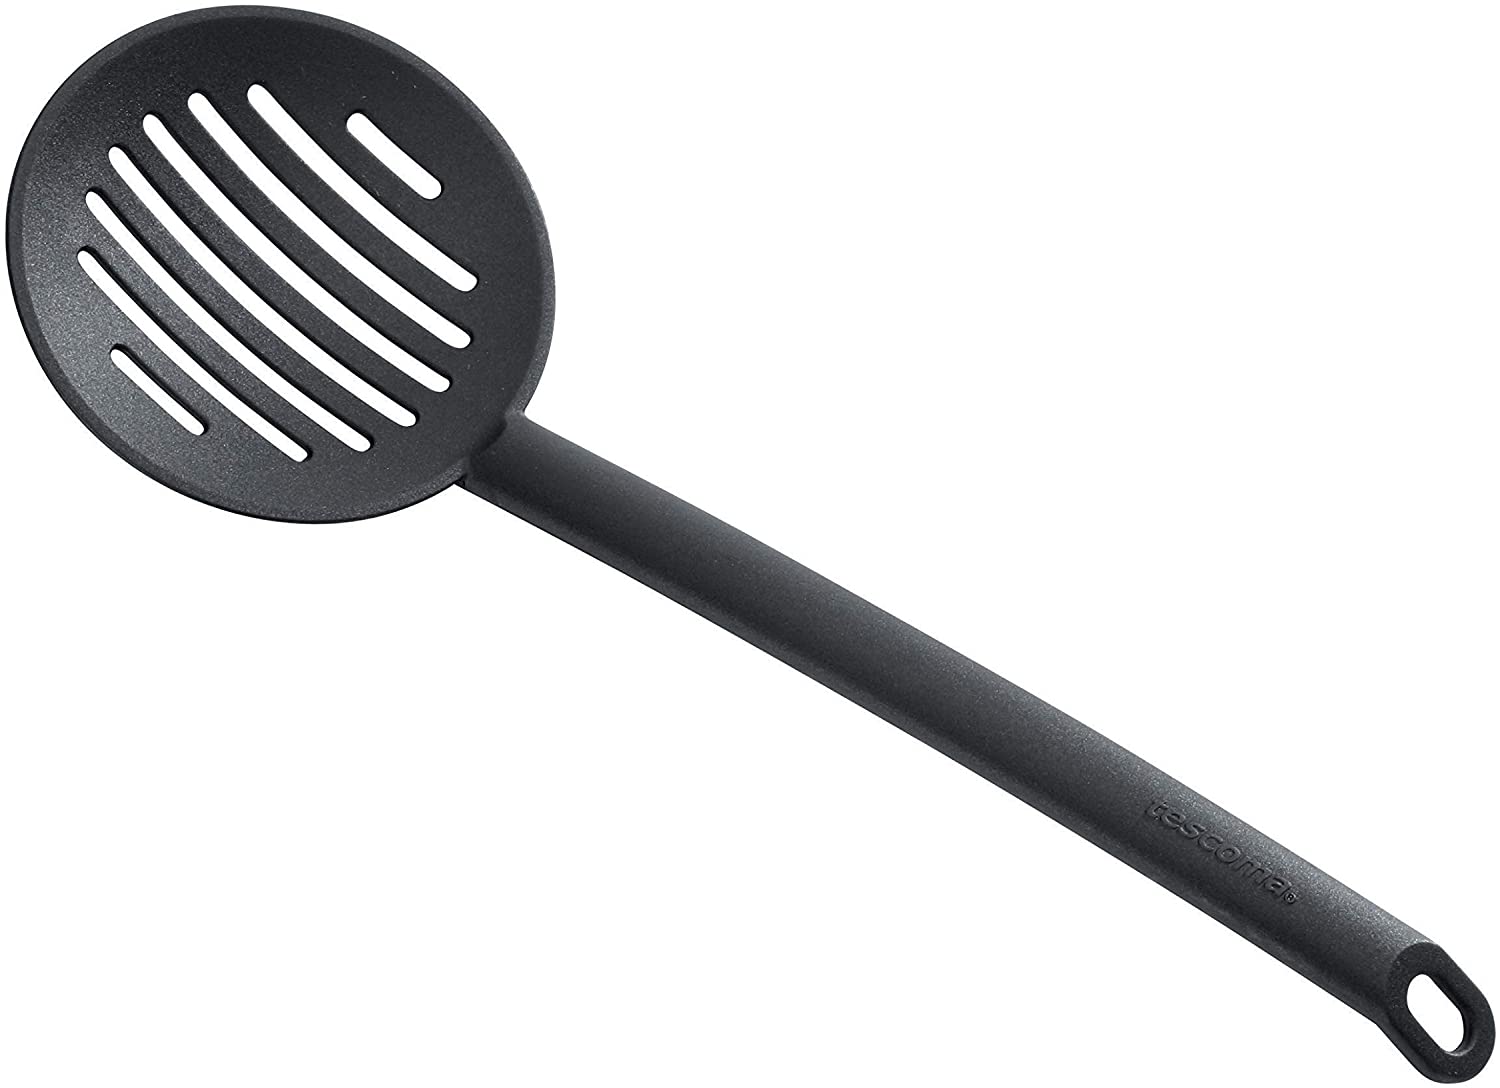 Tescoma Space Line Slotted Spoon